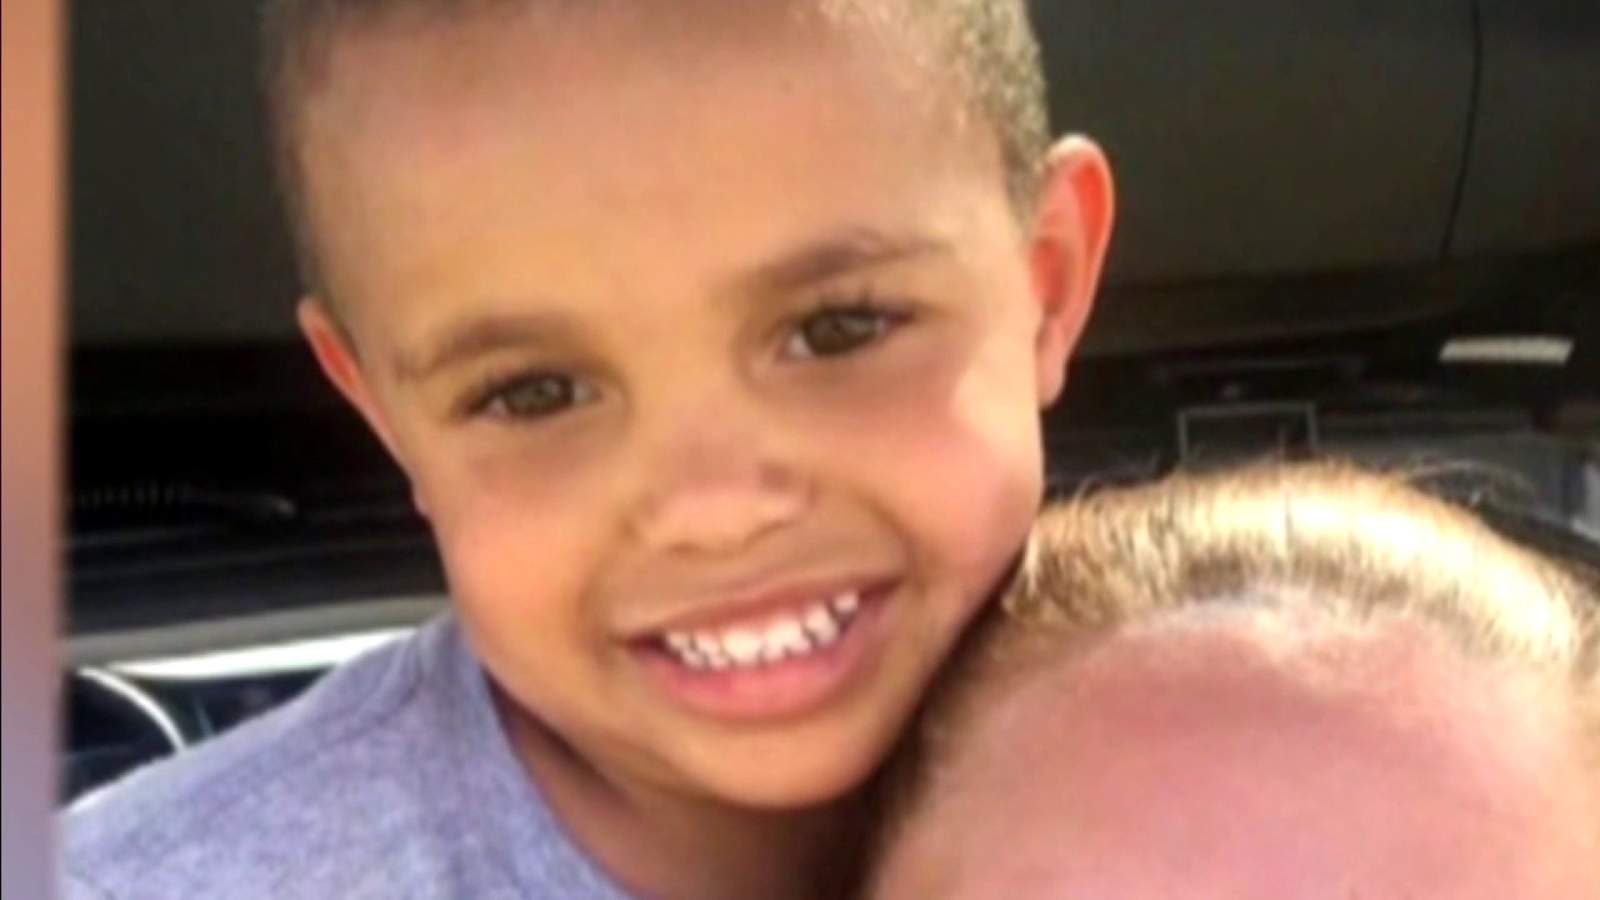 Child who died after plane struck SUV identified as 4-year-old Taylor Bishop